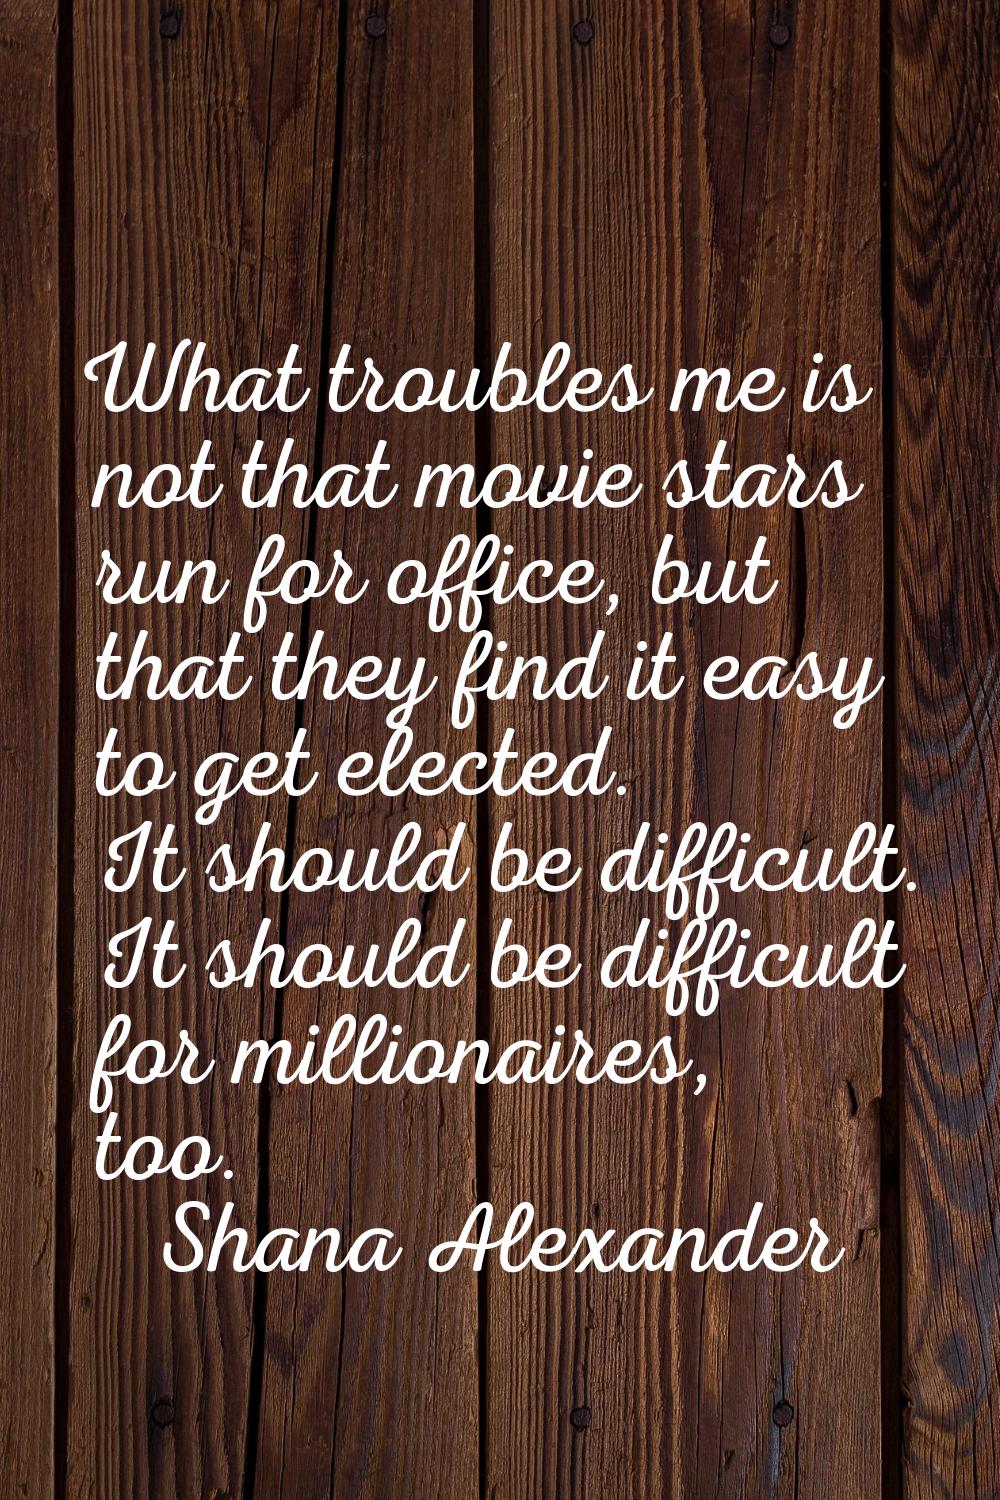 What troubles me is not that movie stars run for office, but that they find it easy to get elected.